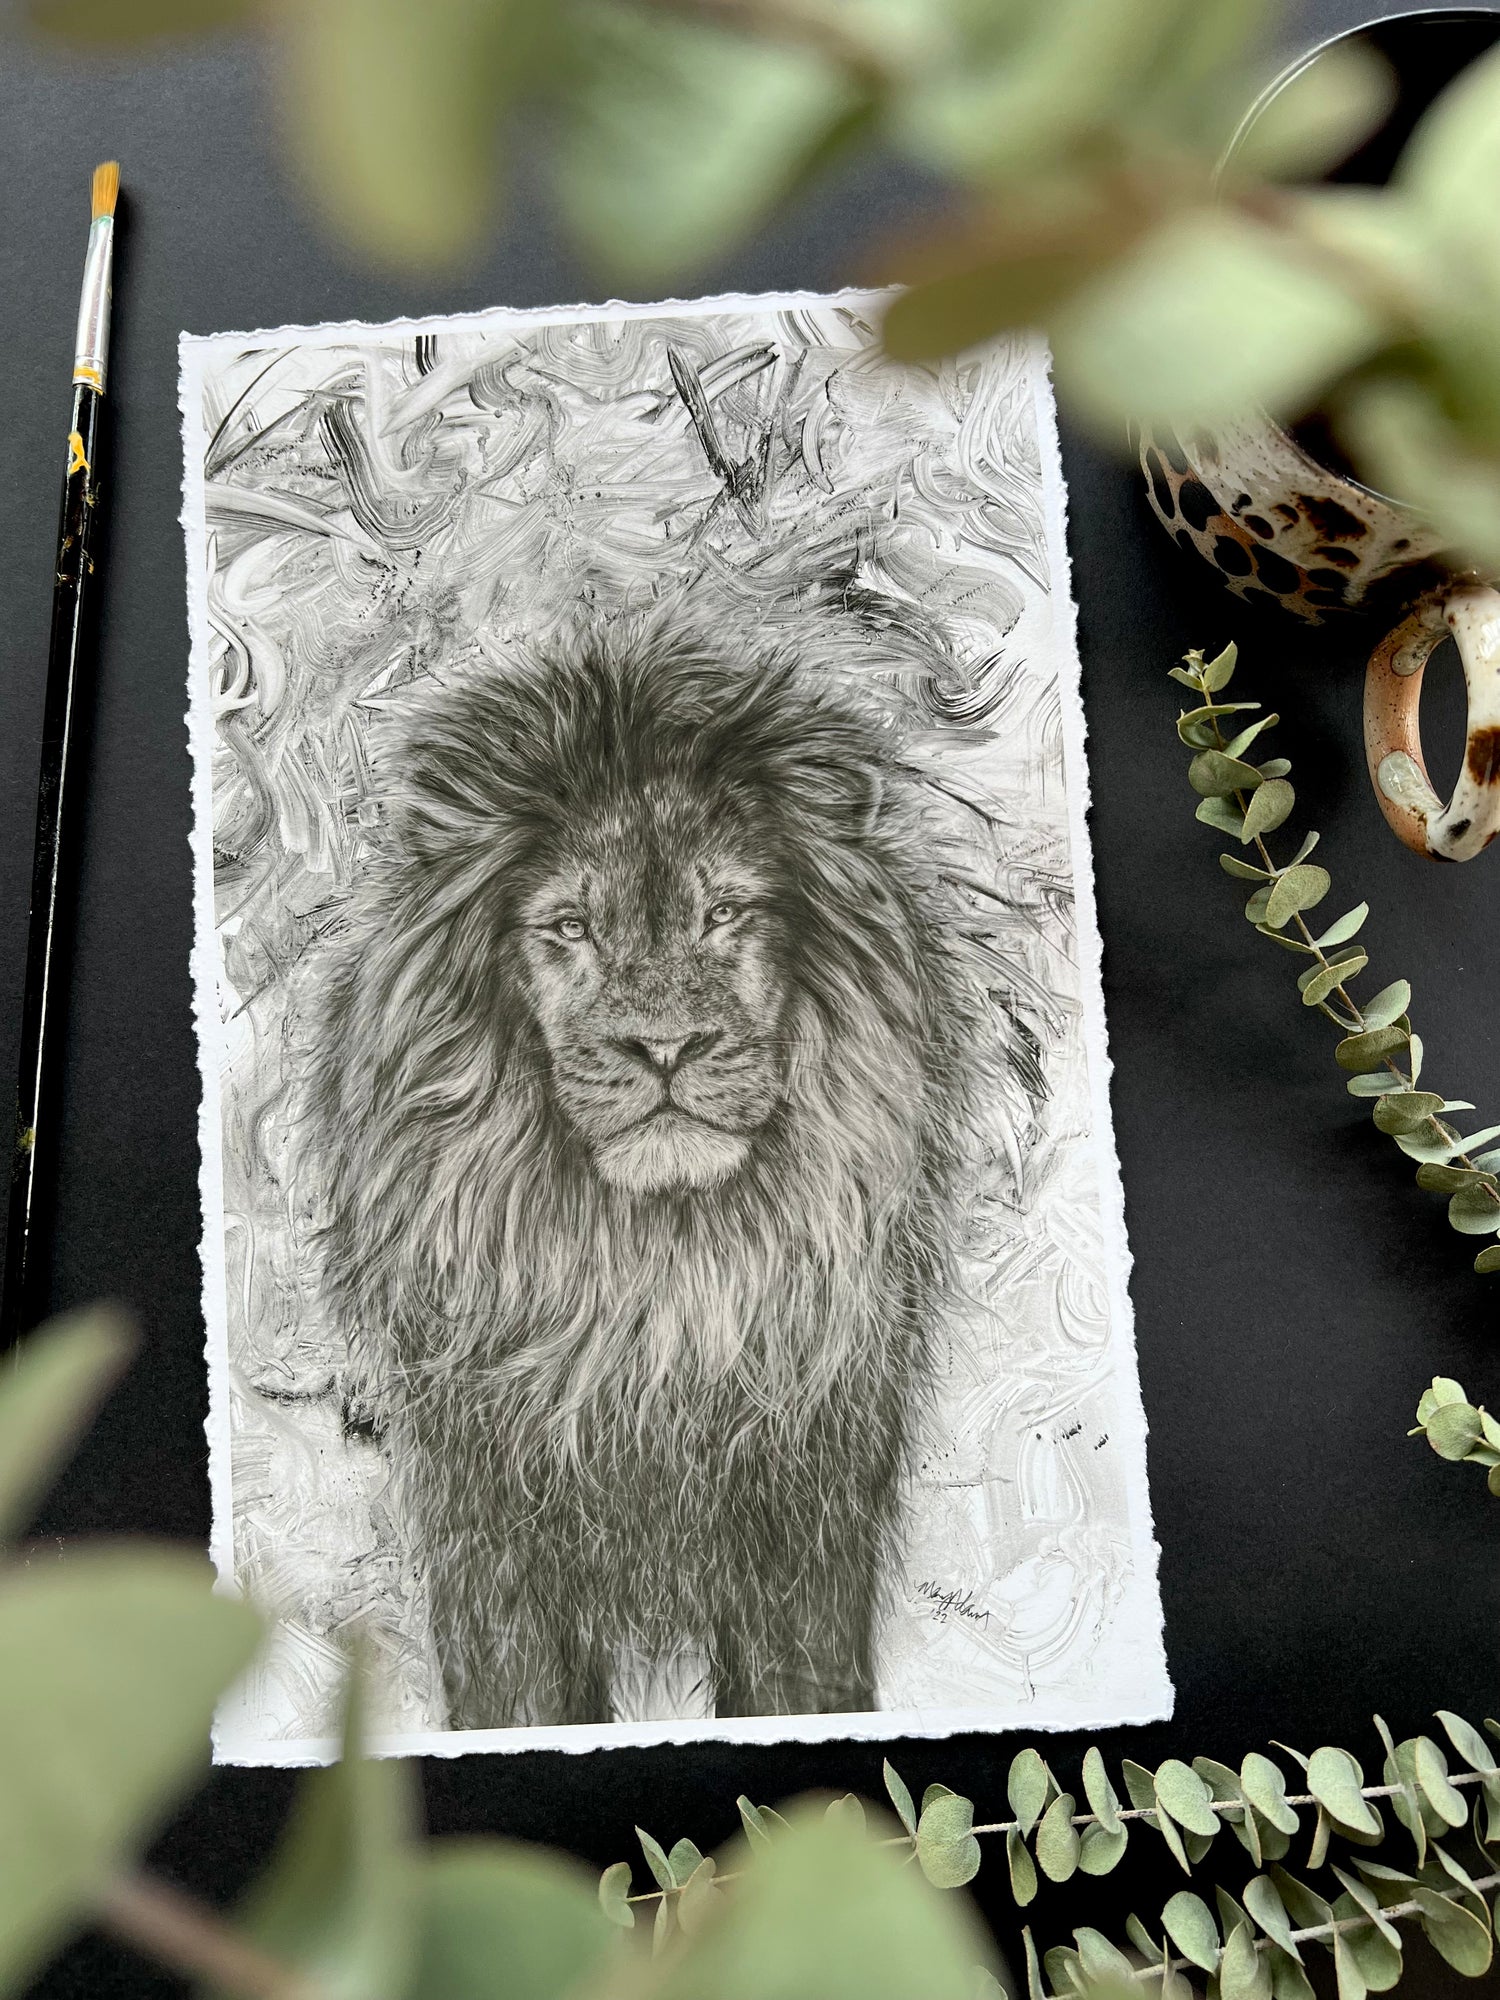 lion artwork realistic drawing shrouded by leaves